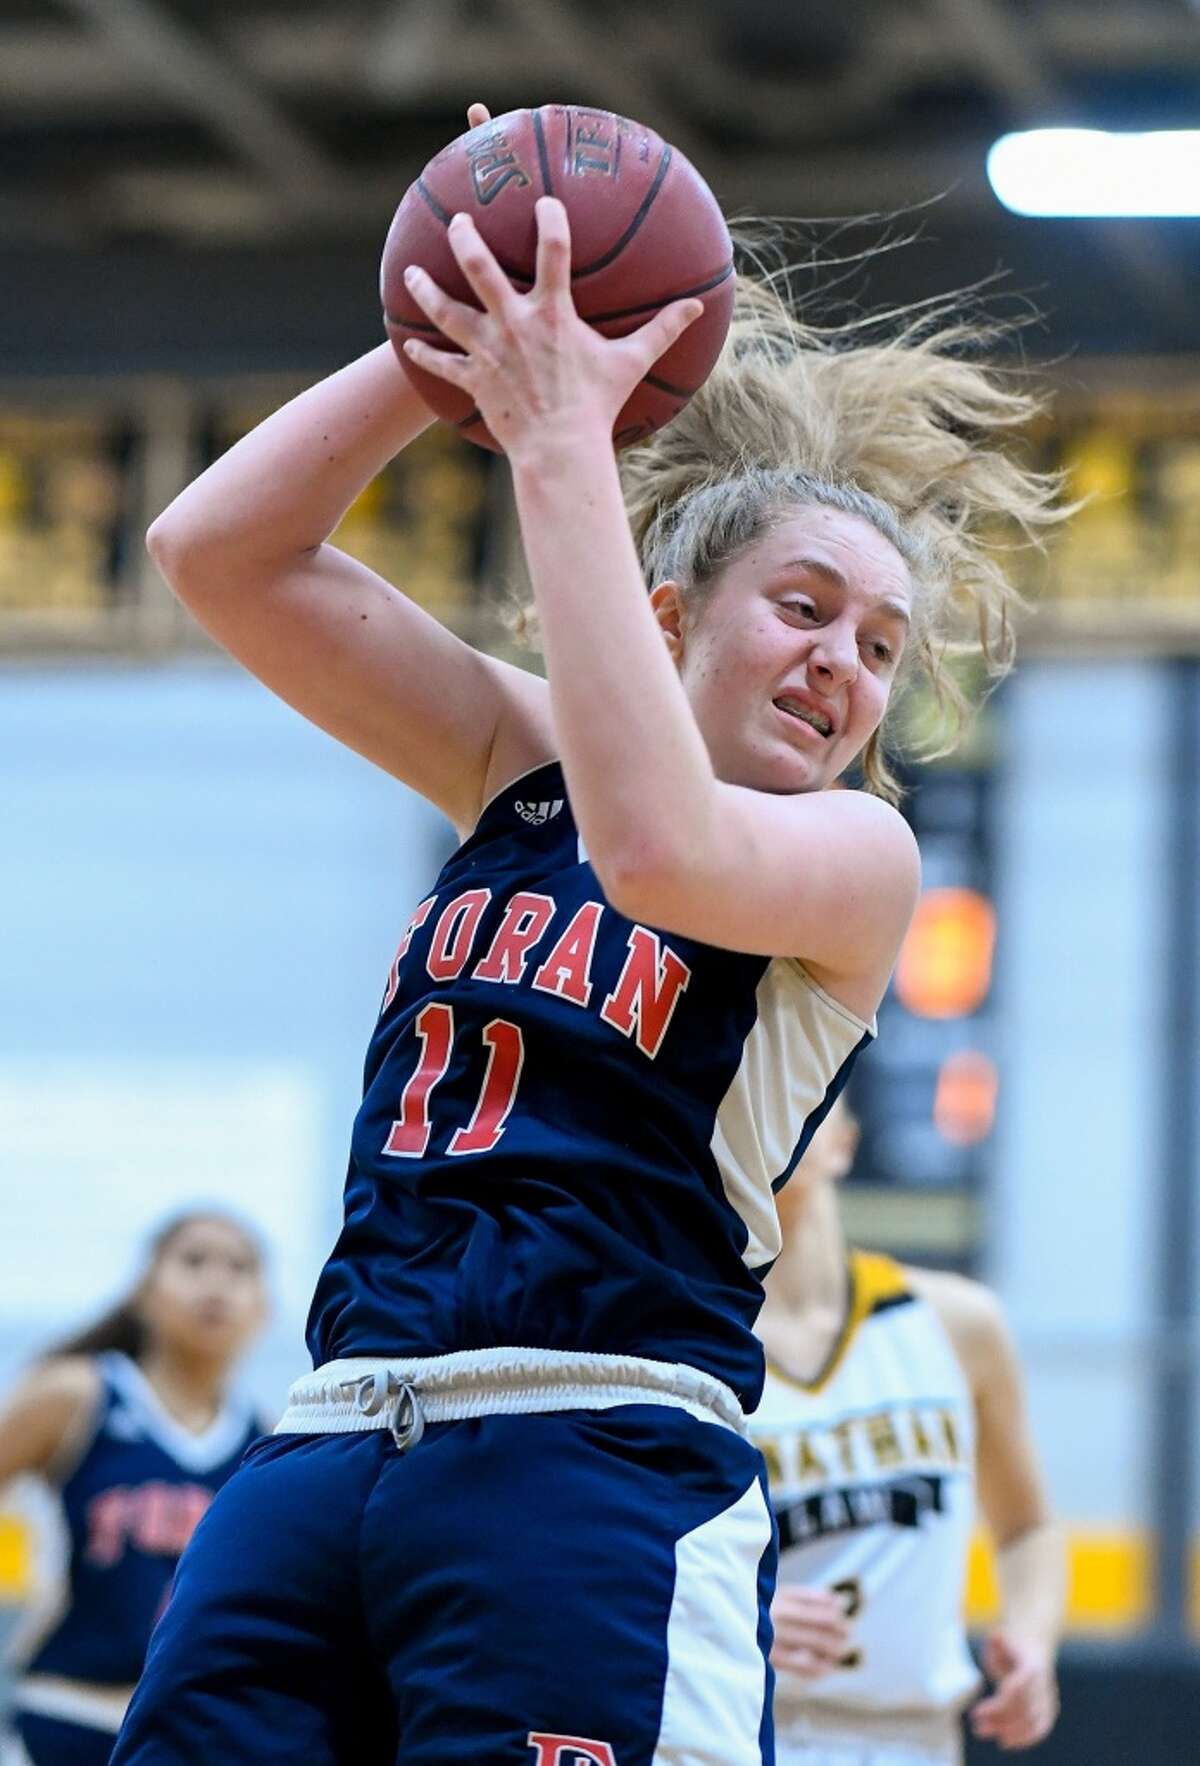 Foran High’s Mia Tunucci scored 13 points, with 18 rebounds and three blocked shots in the victory.